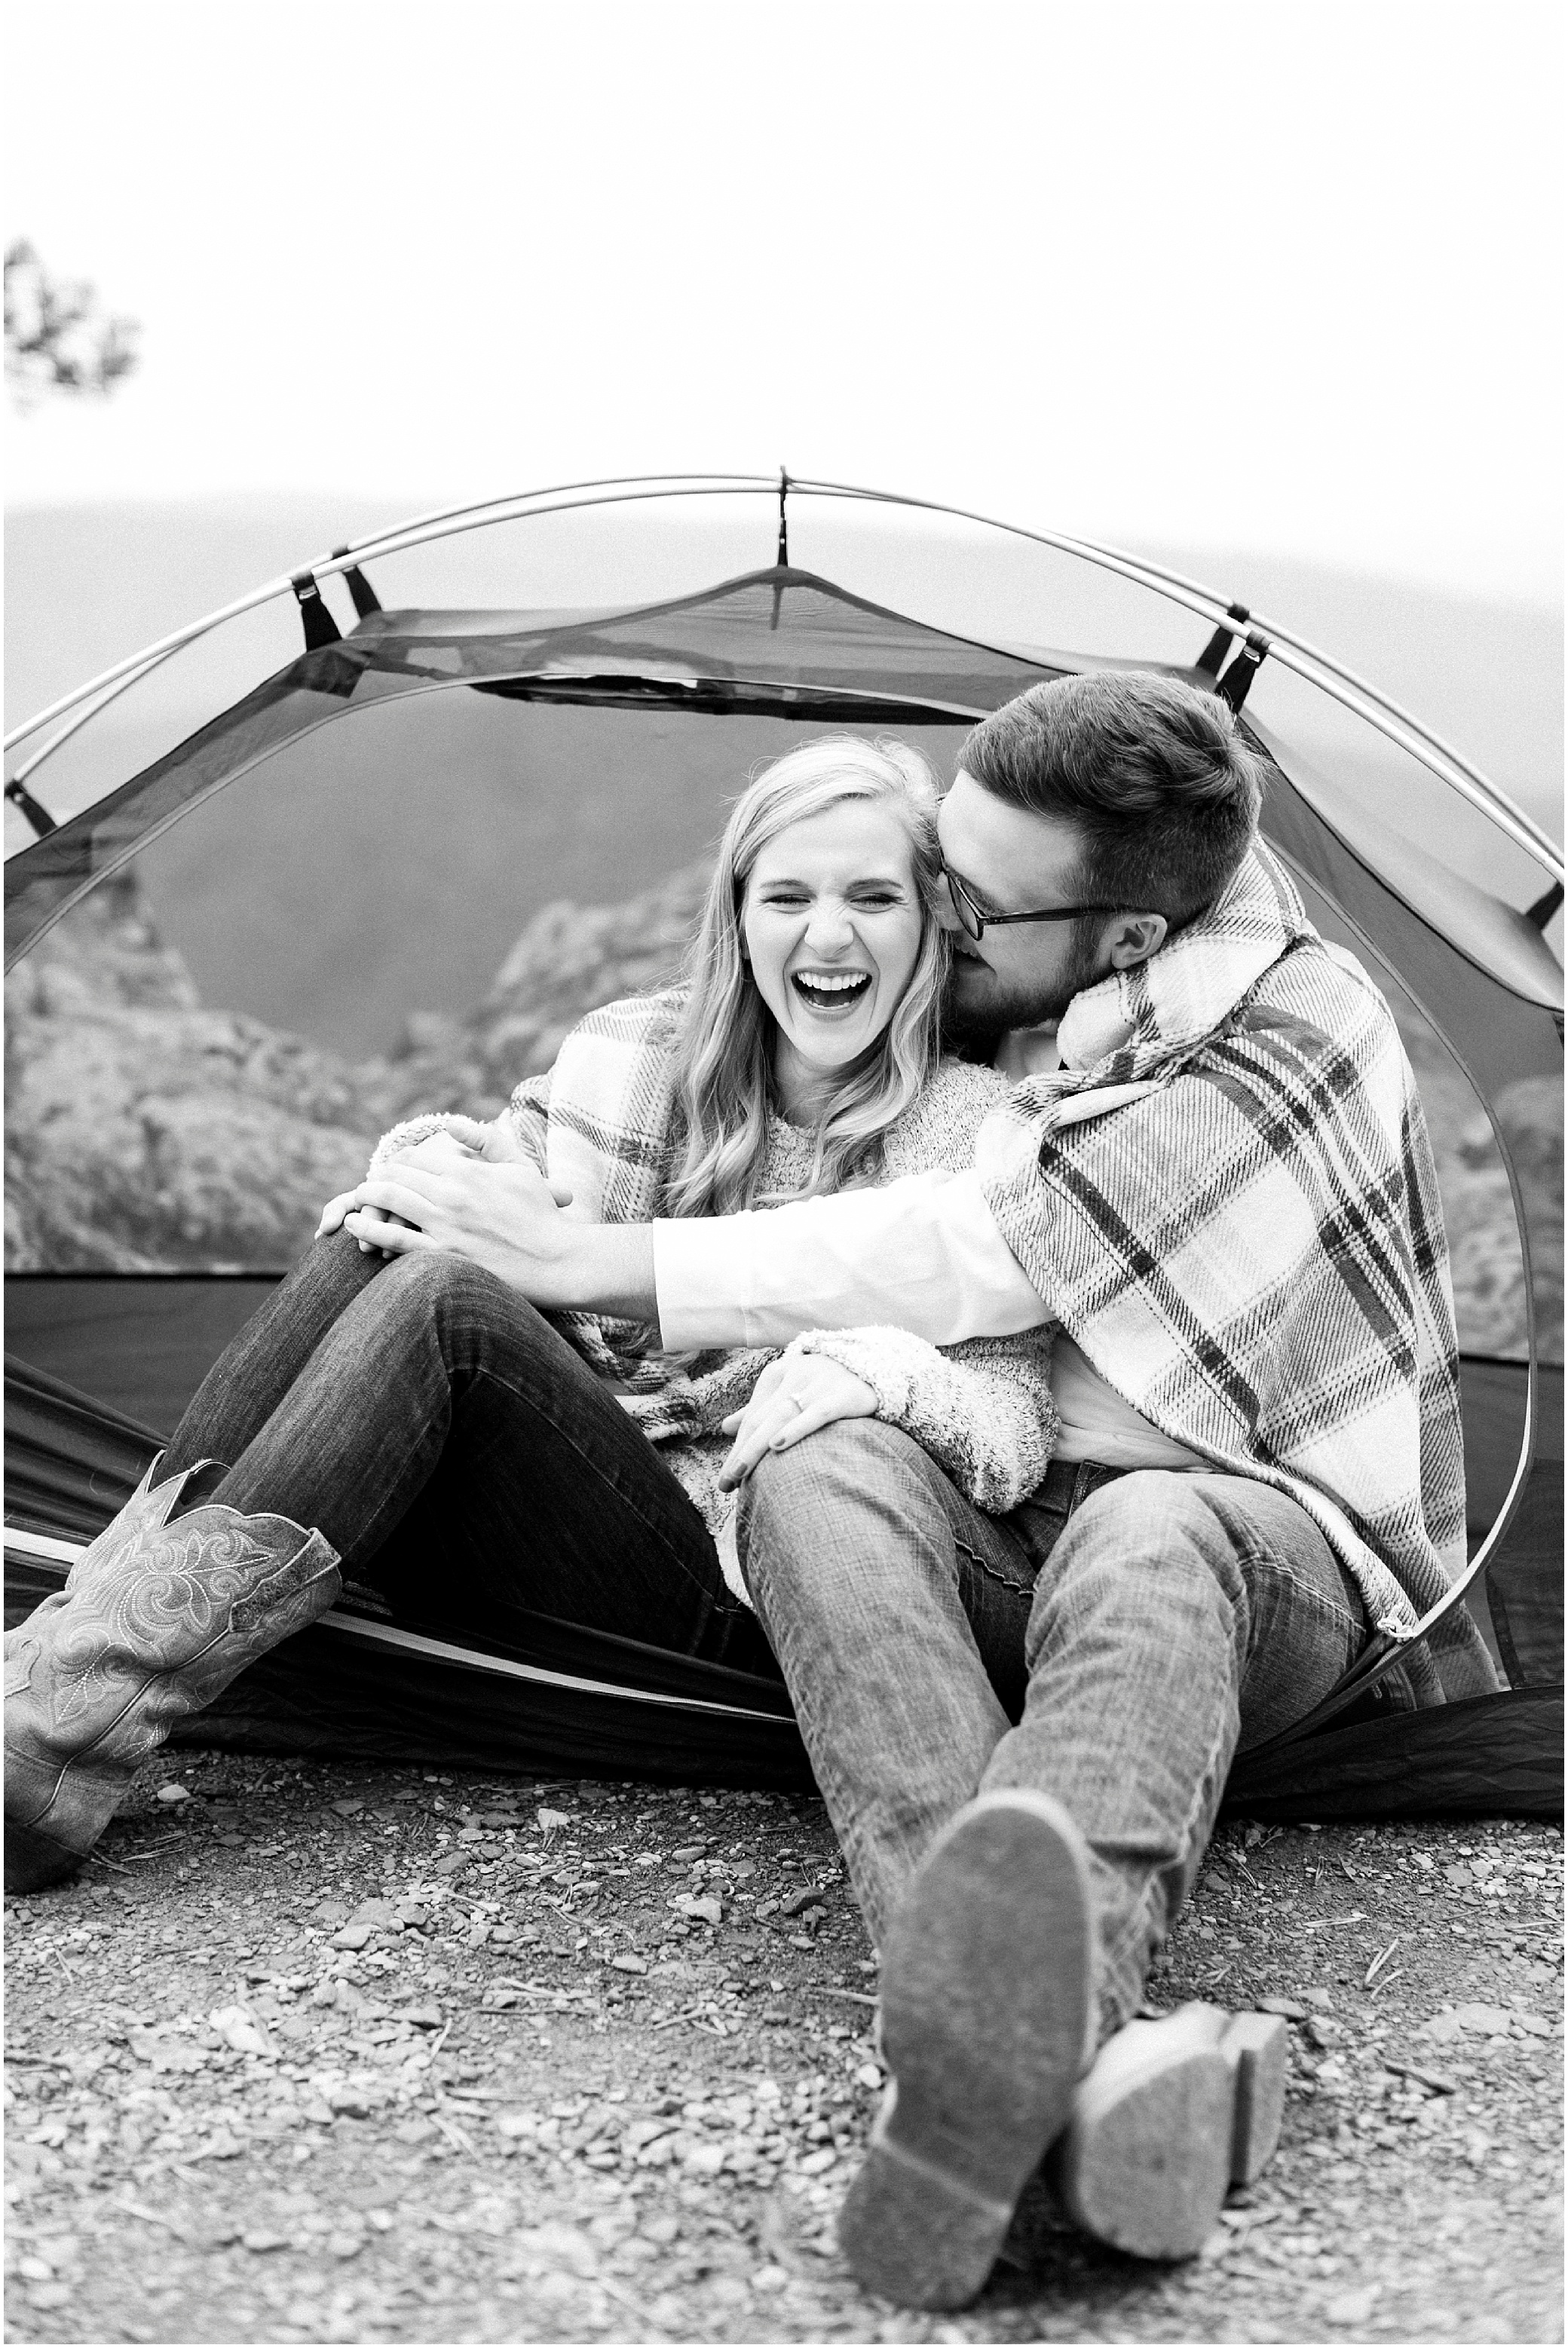 blue ridge parkway engagements, ravens roost candid couple photography, camping couple, hiking couple, adventurous couple, REI couple